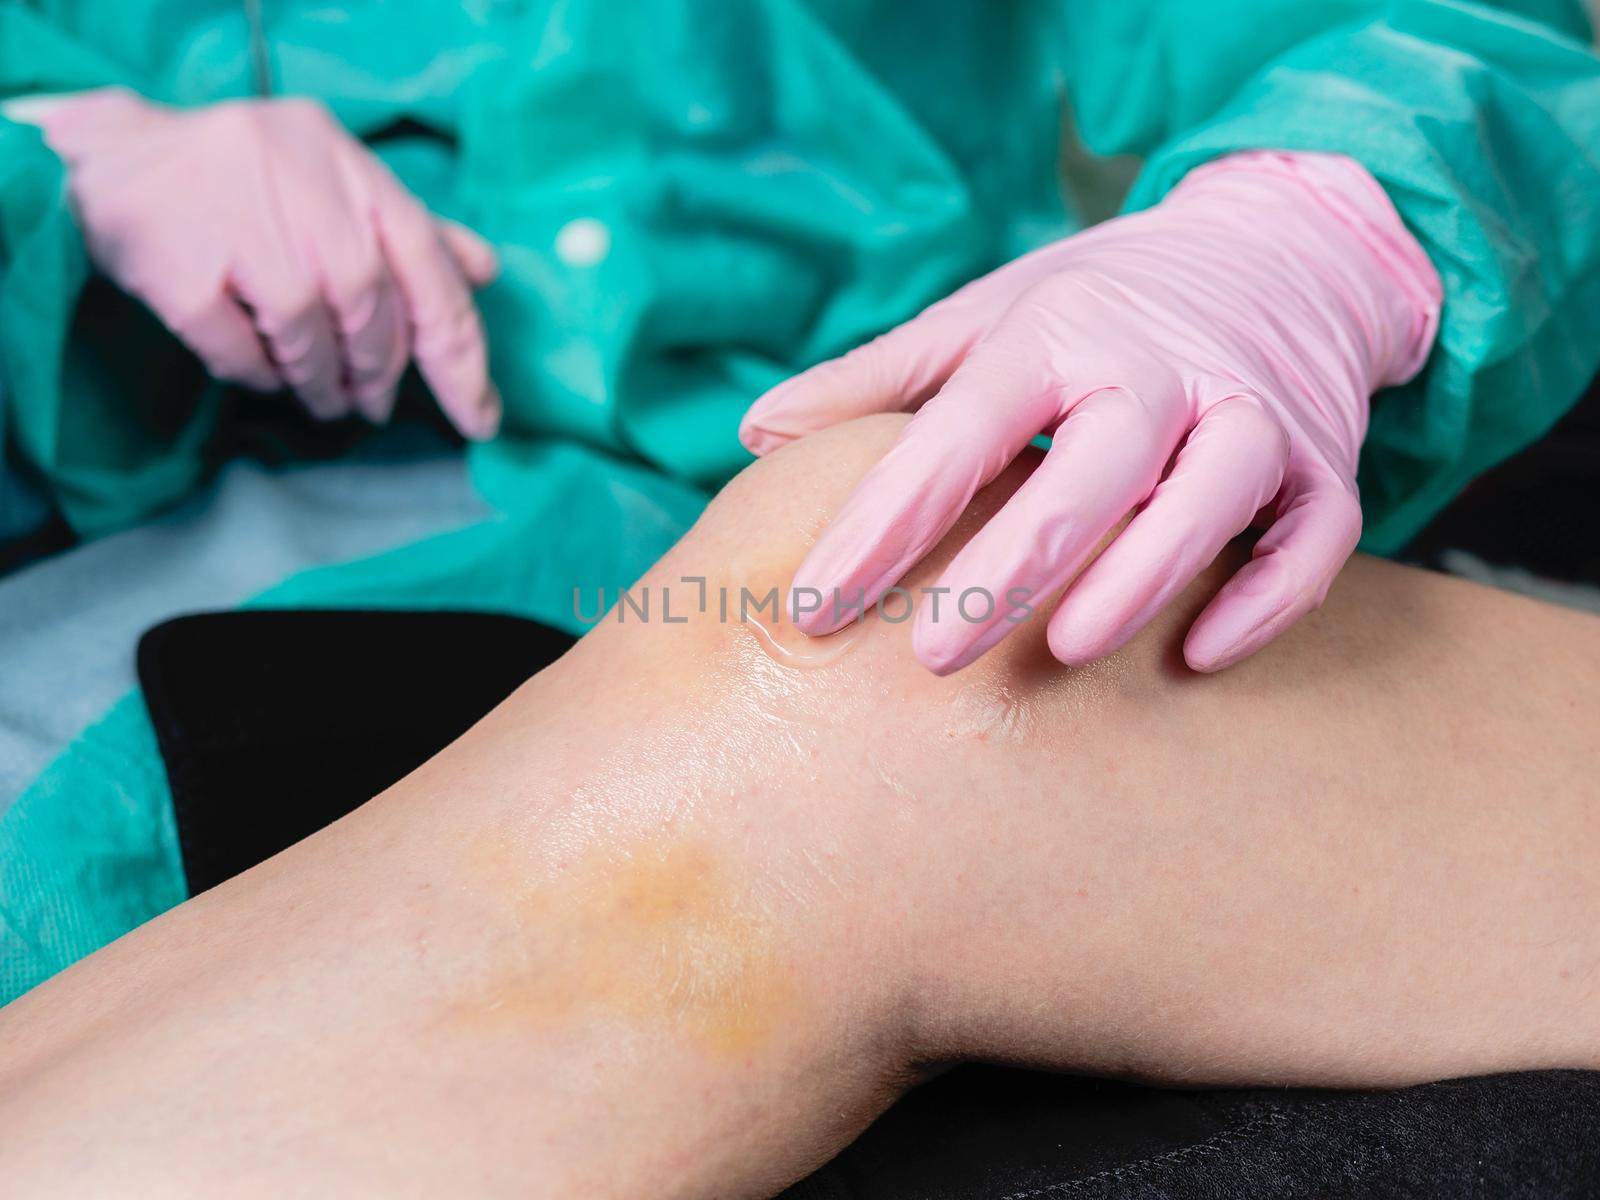 Close-up Applying a healing ointment to a bruise on the leg. Family doctor examines leg injury